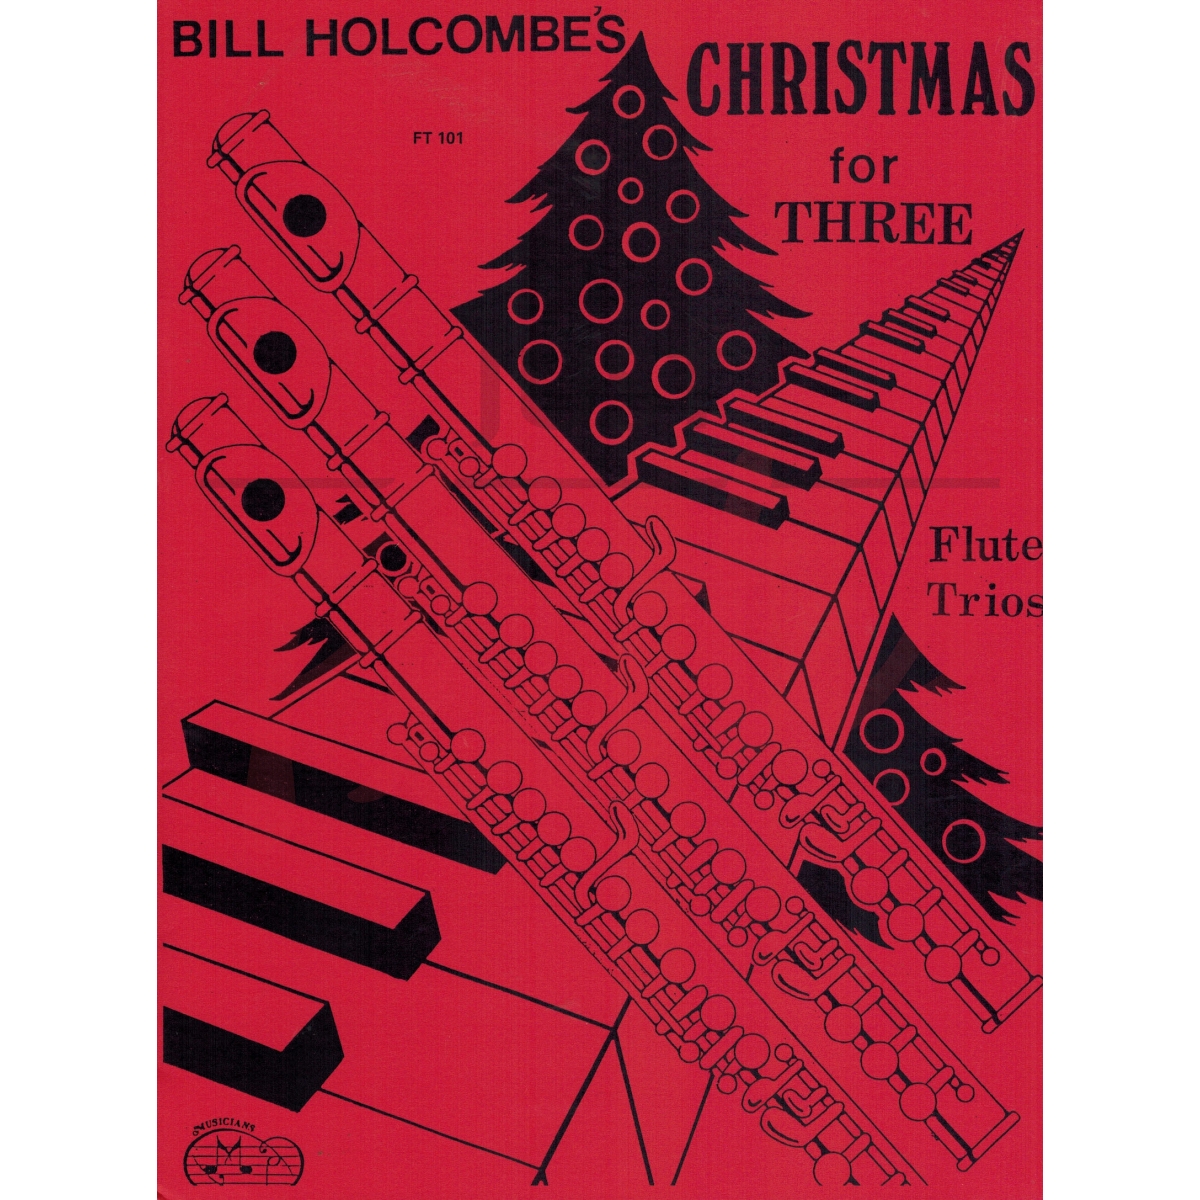 Christmas for Three Flutes